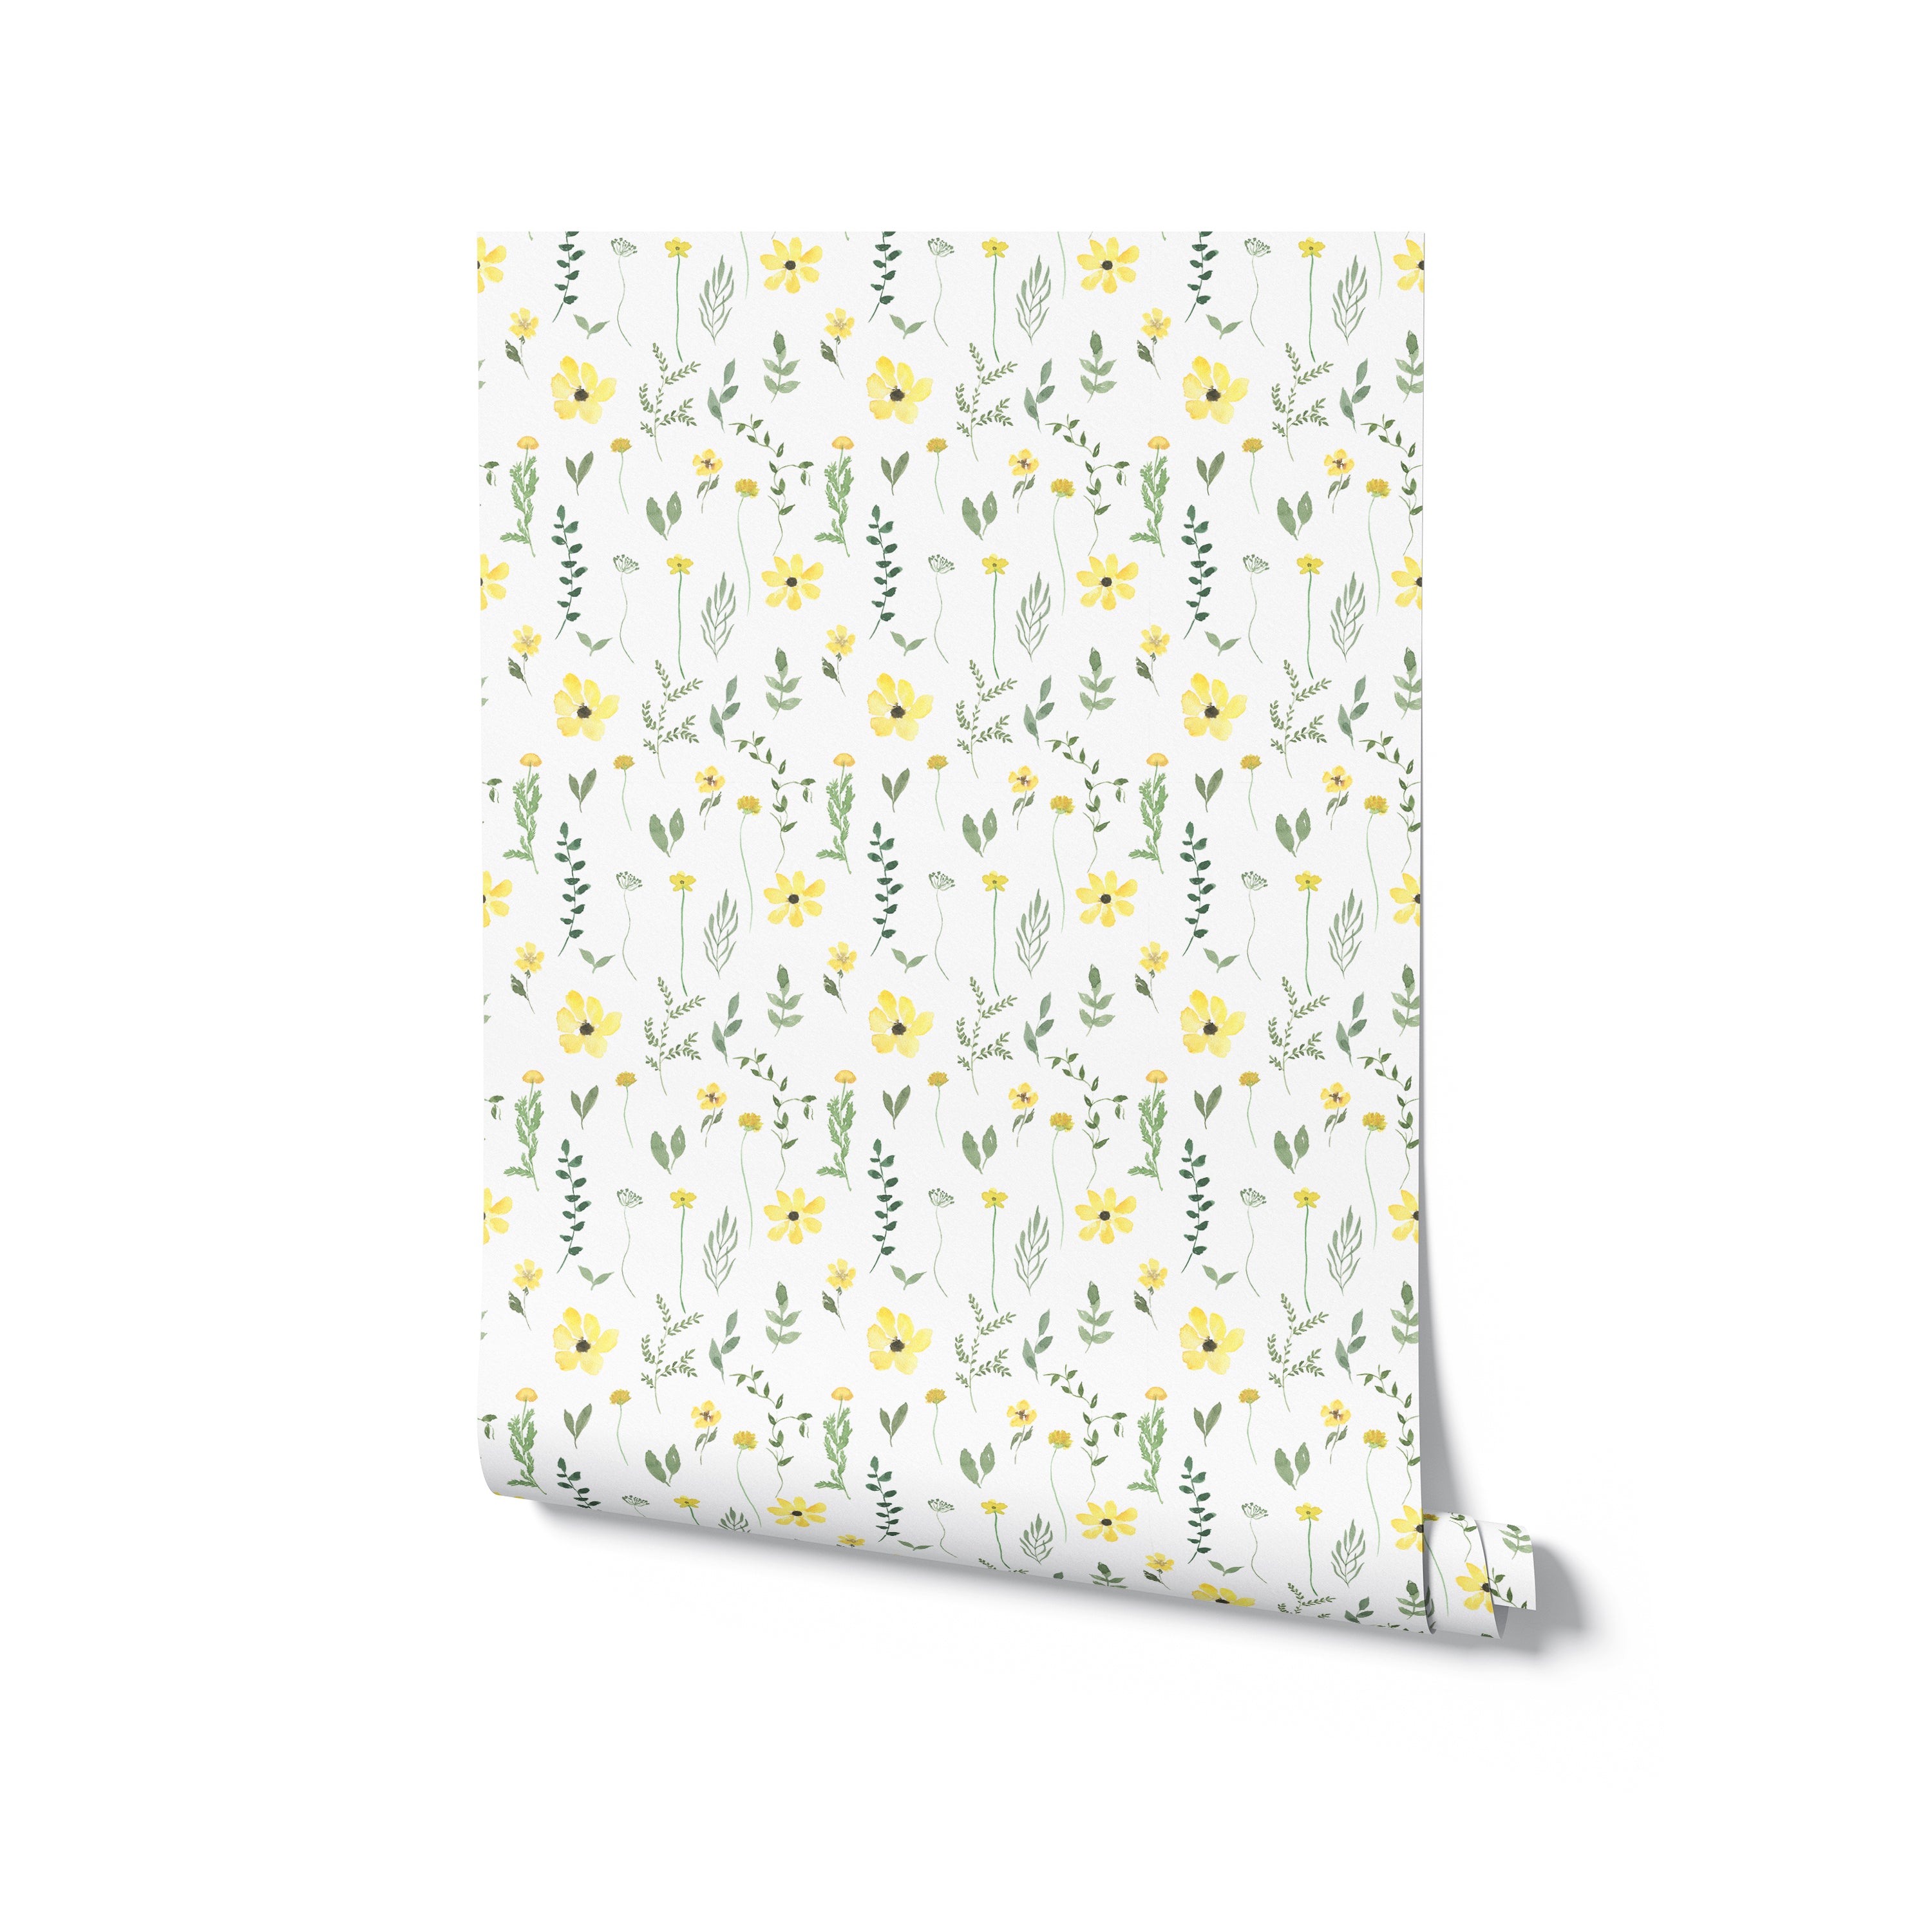 A roll of Spring Field Wallpaper - V displaying its continuous pattern of yellow flowers and green leaves on a white background, perfect for adding a touch of spring to any room